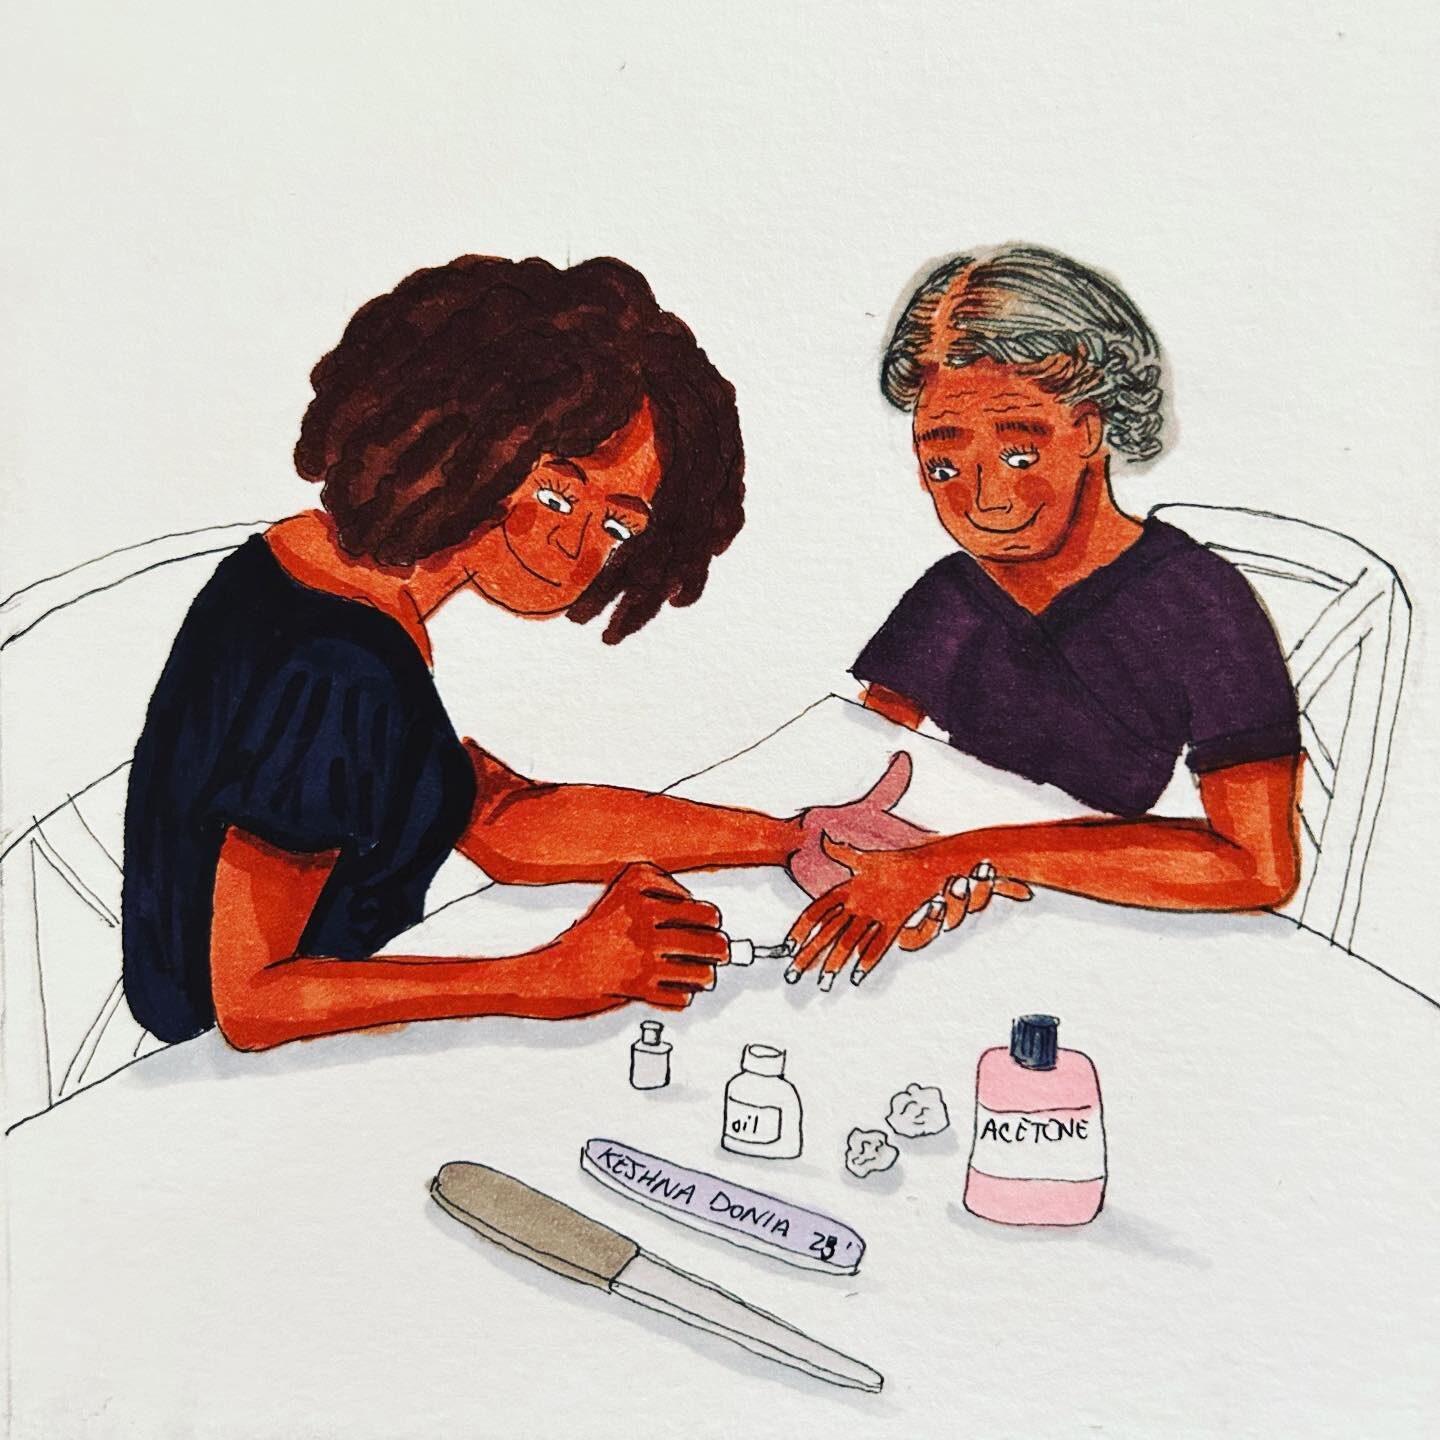 Drawing 27/100 painting nails 
.
.
The other day I was at my moms house. I styled her hair in two flat twists that lay to the sides of her head. Then I filed and painted her nails. I believe her love language is acts of service. What&rsquo;s your lov